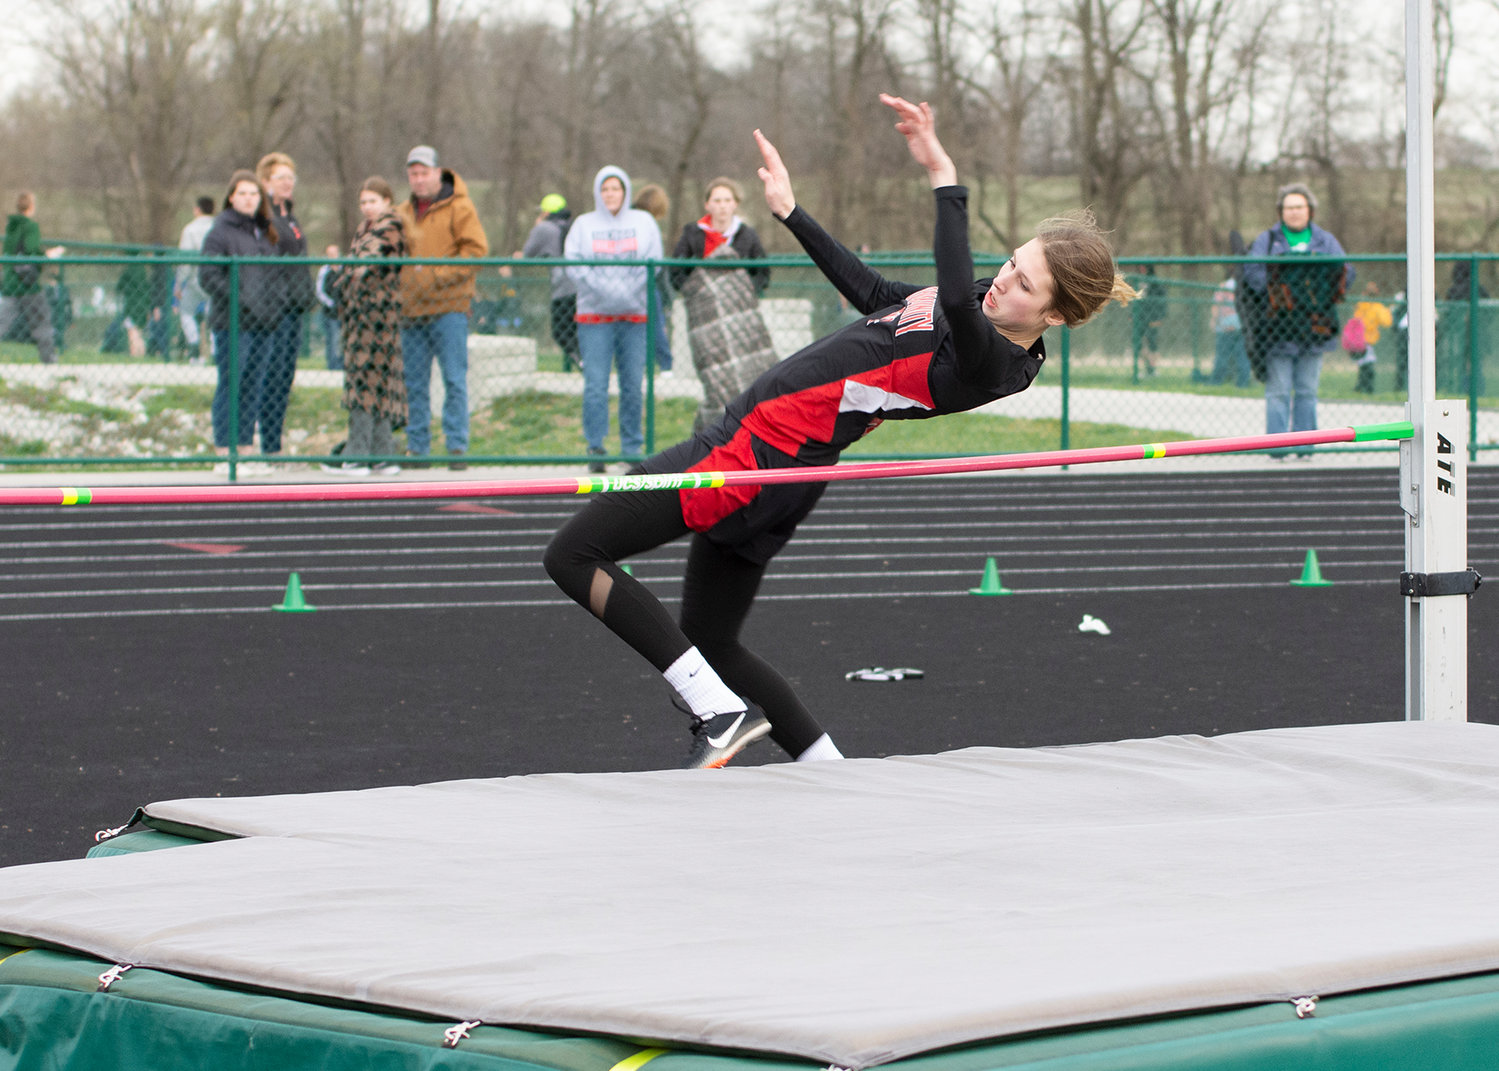 Paige Meyer clears the bar in the high jump competition at North Callaway. Meyer broke Community R-6's school record with a 4-9. [Leslie A. Meyer Photography]